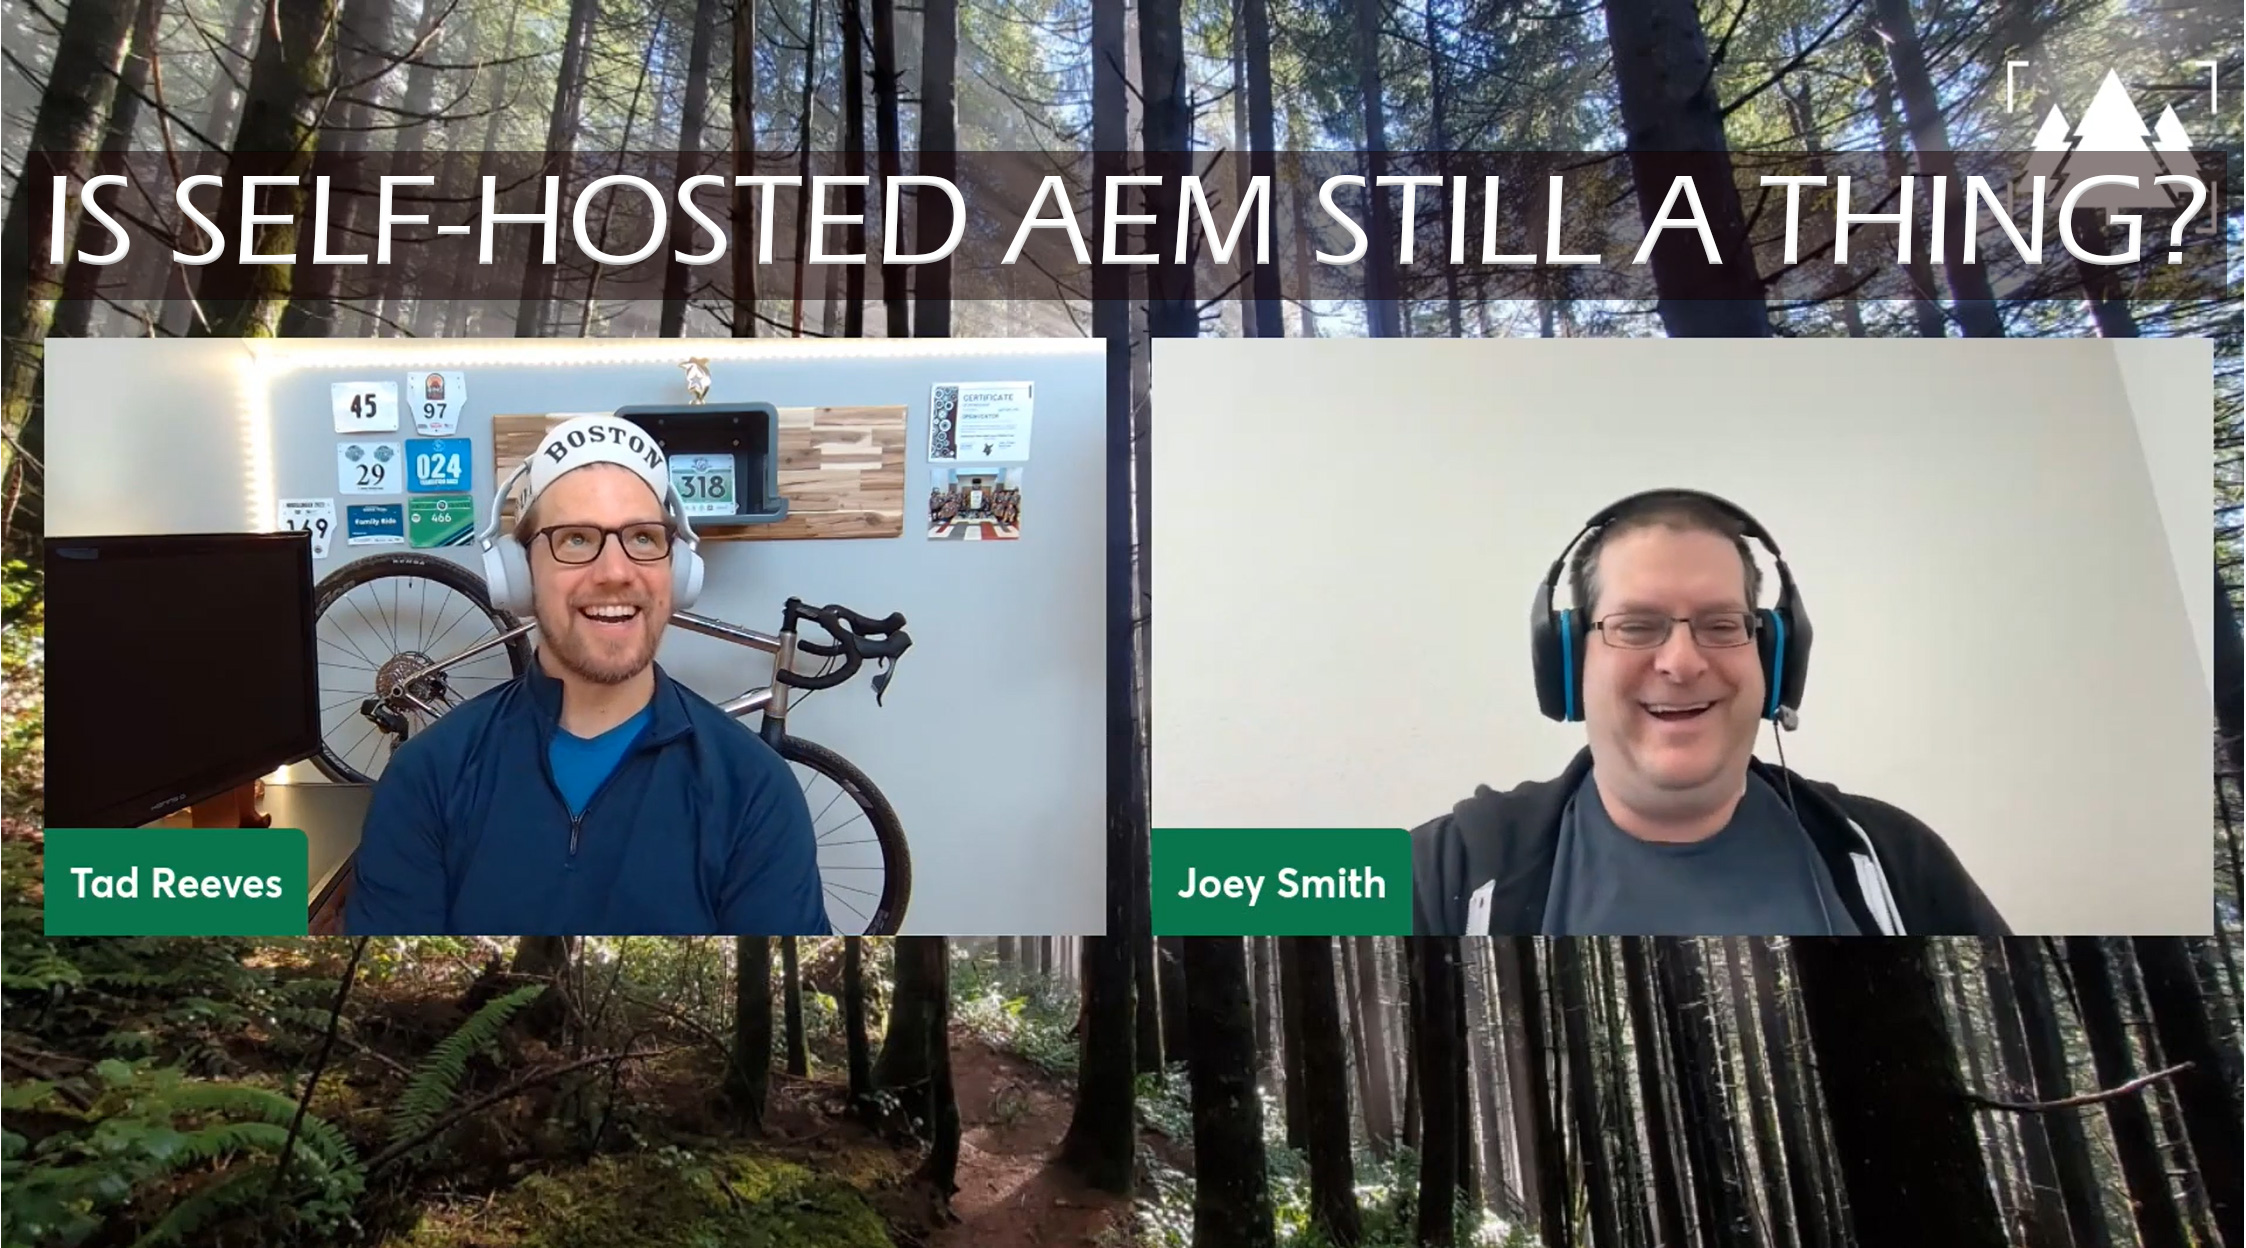 Is Self-Hosted AEM Still a Thing?